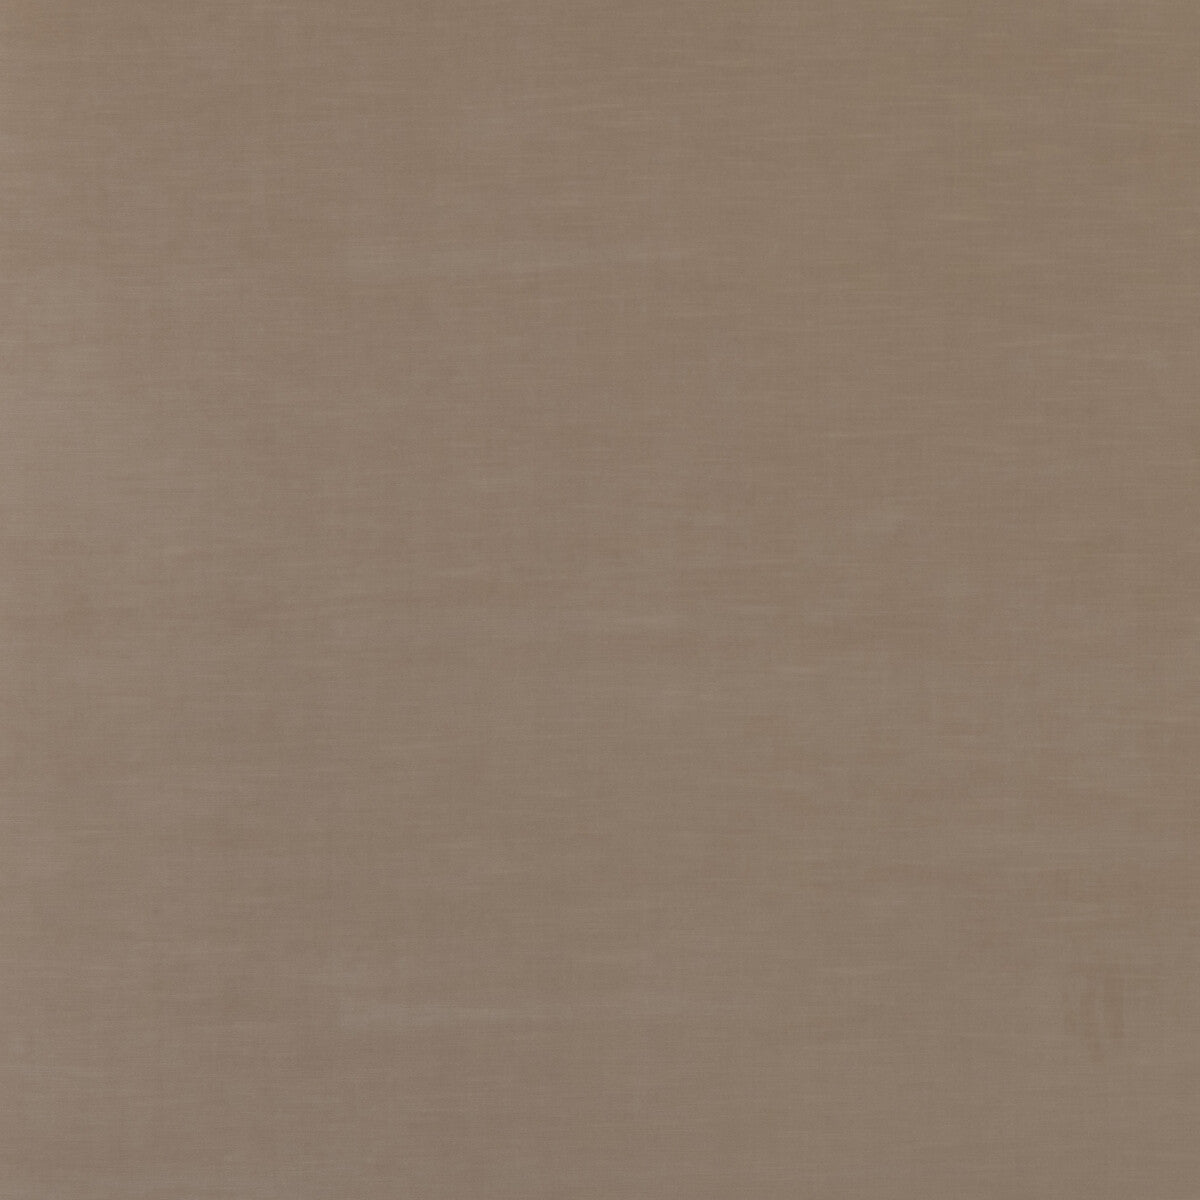 Quintessential Velvet fabric in nutmeg color - pattern ED85359.250.0 - by Threads in the Quintessential Velvet collection